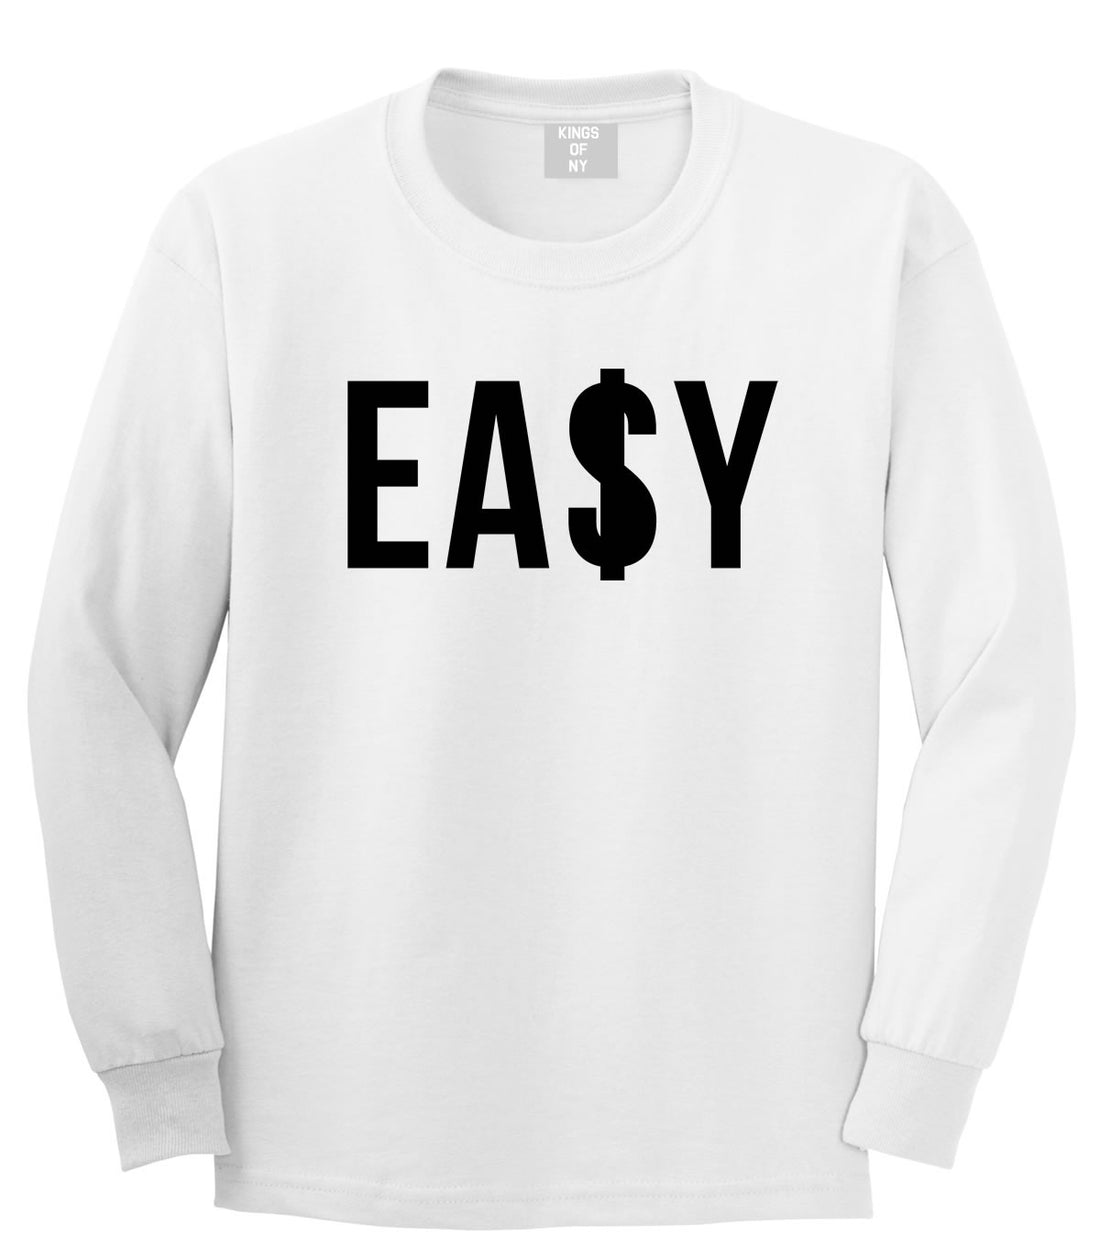 Easy Money Big High Dope Cool Black by Kings Of NY Long Sleeve Boys Kids T-Shirt in White by Kings Of NY